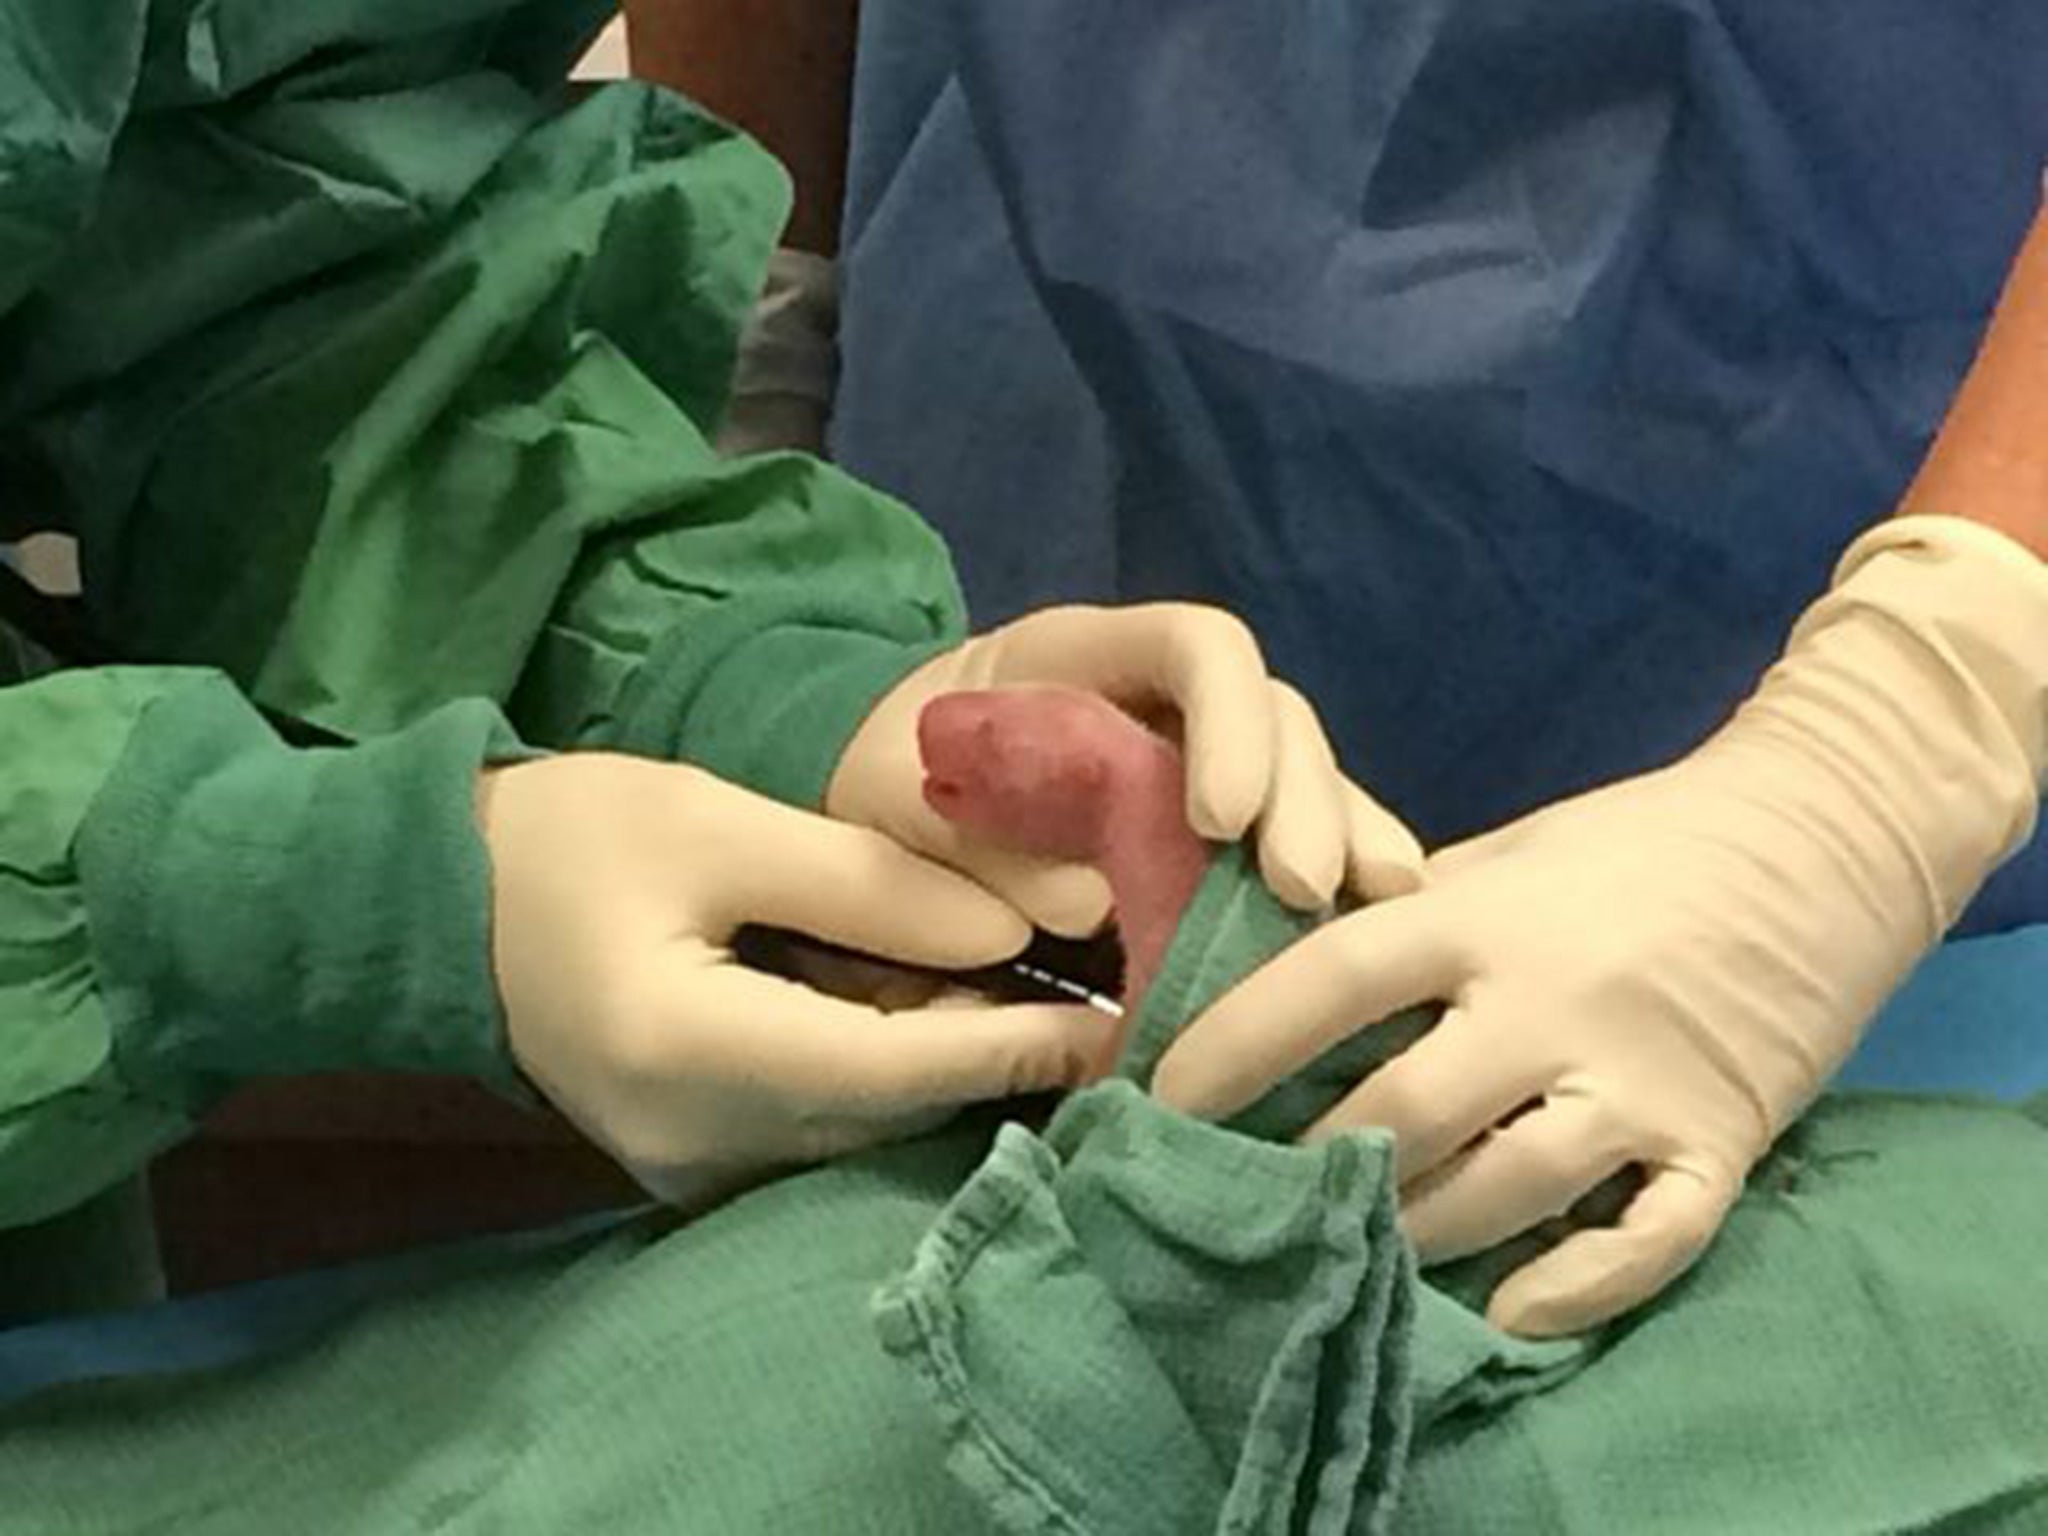 Veterinarians examining one of the two new born giant panda cubs from a litter born earlier this year in Washington